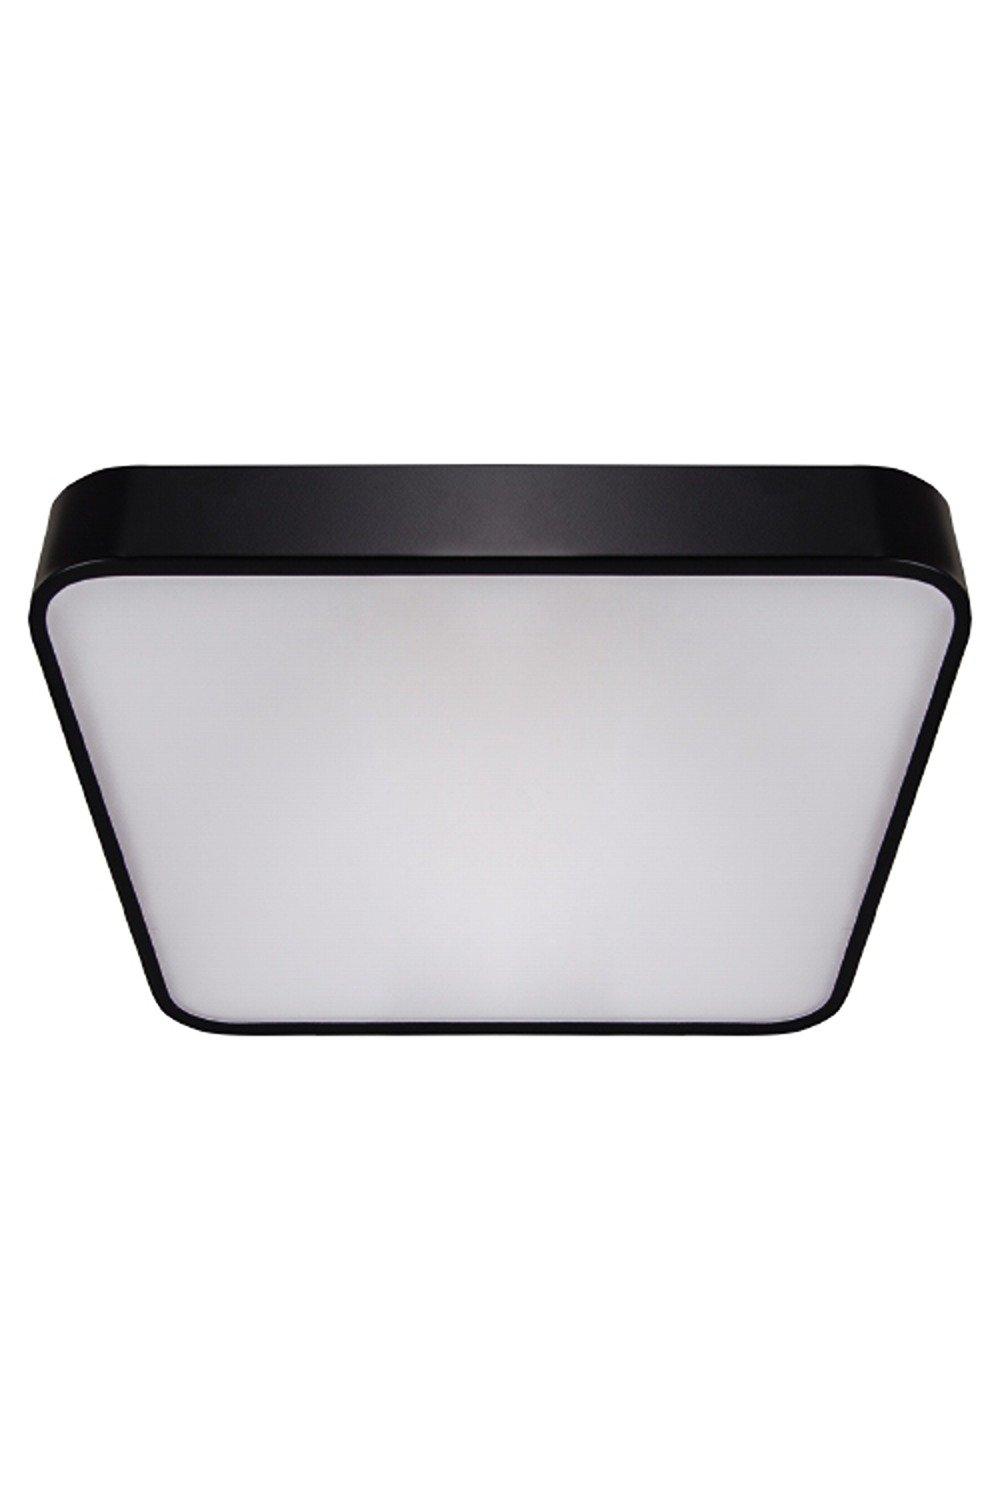 'Luna' Black Square Ceiling Wall Light Surface Mount 48W